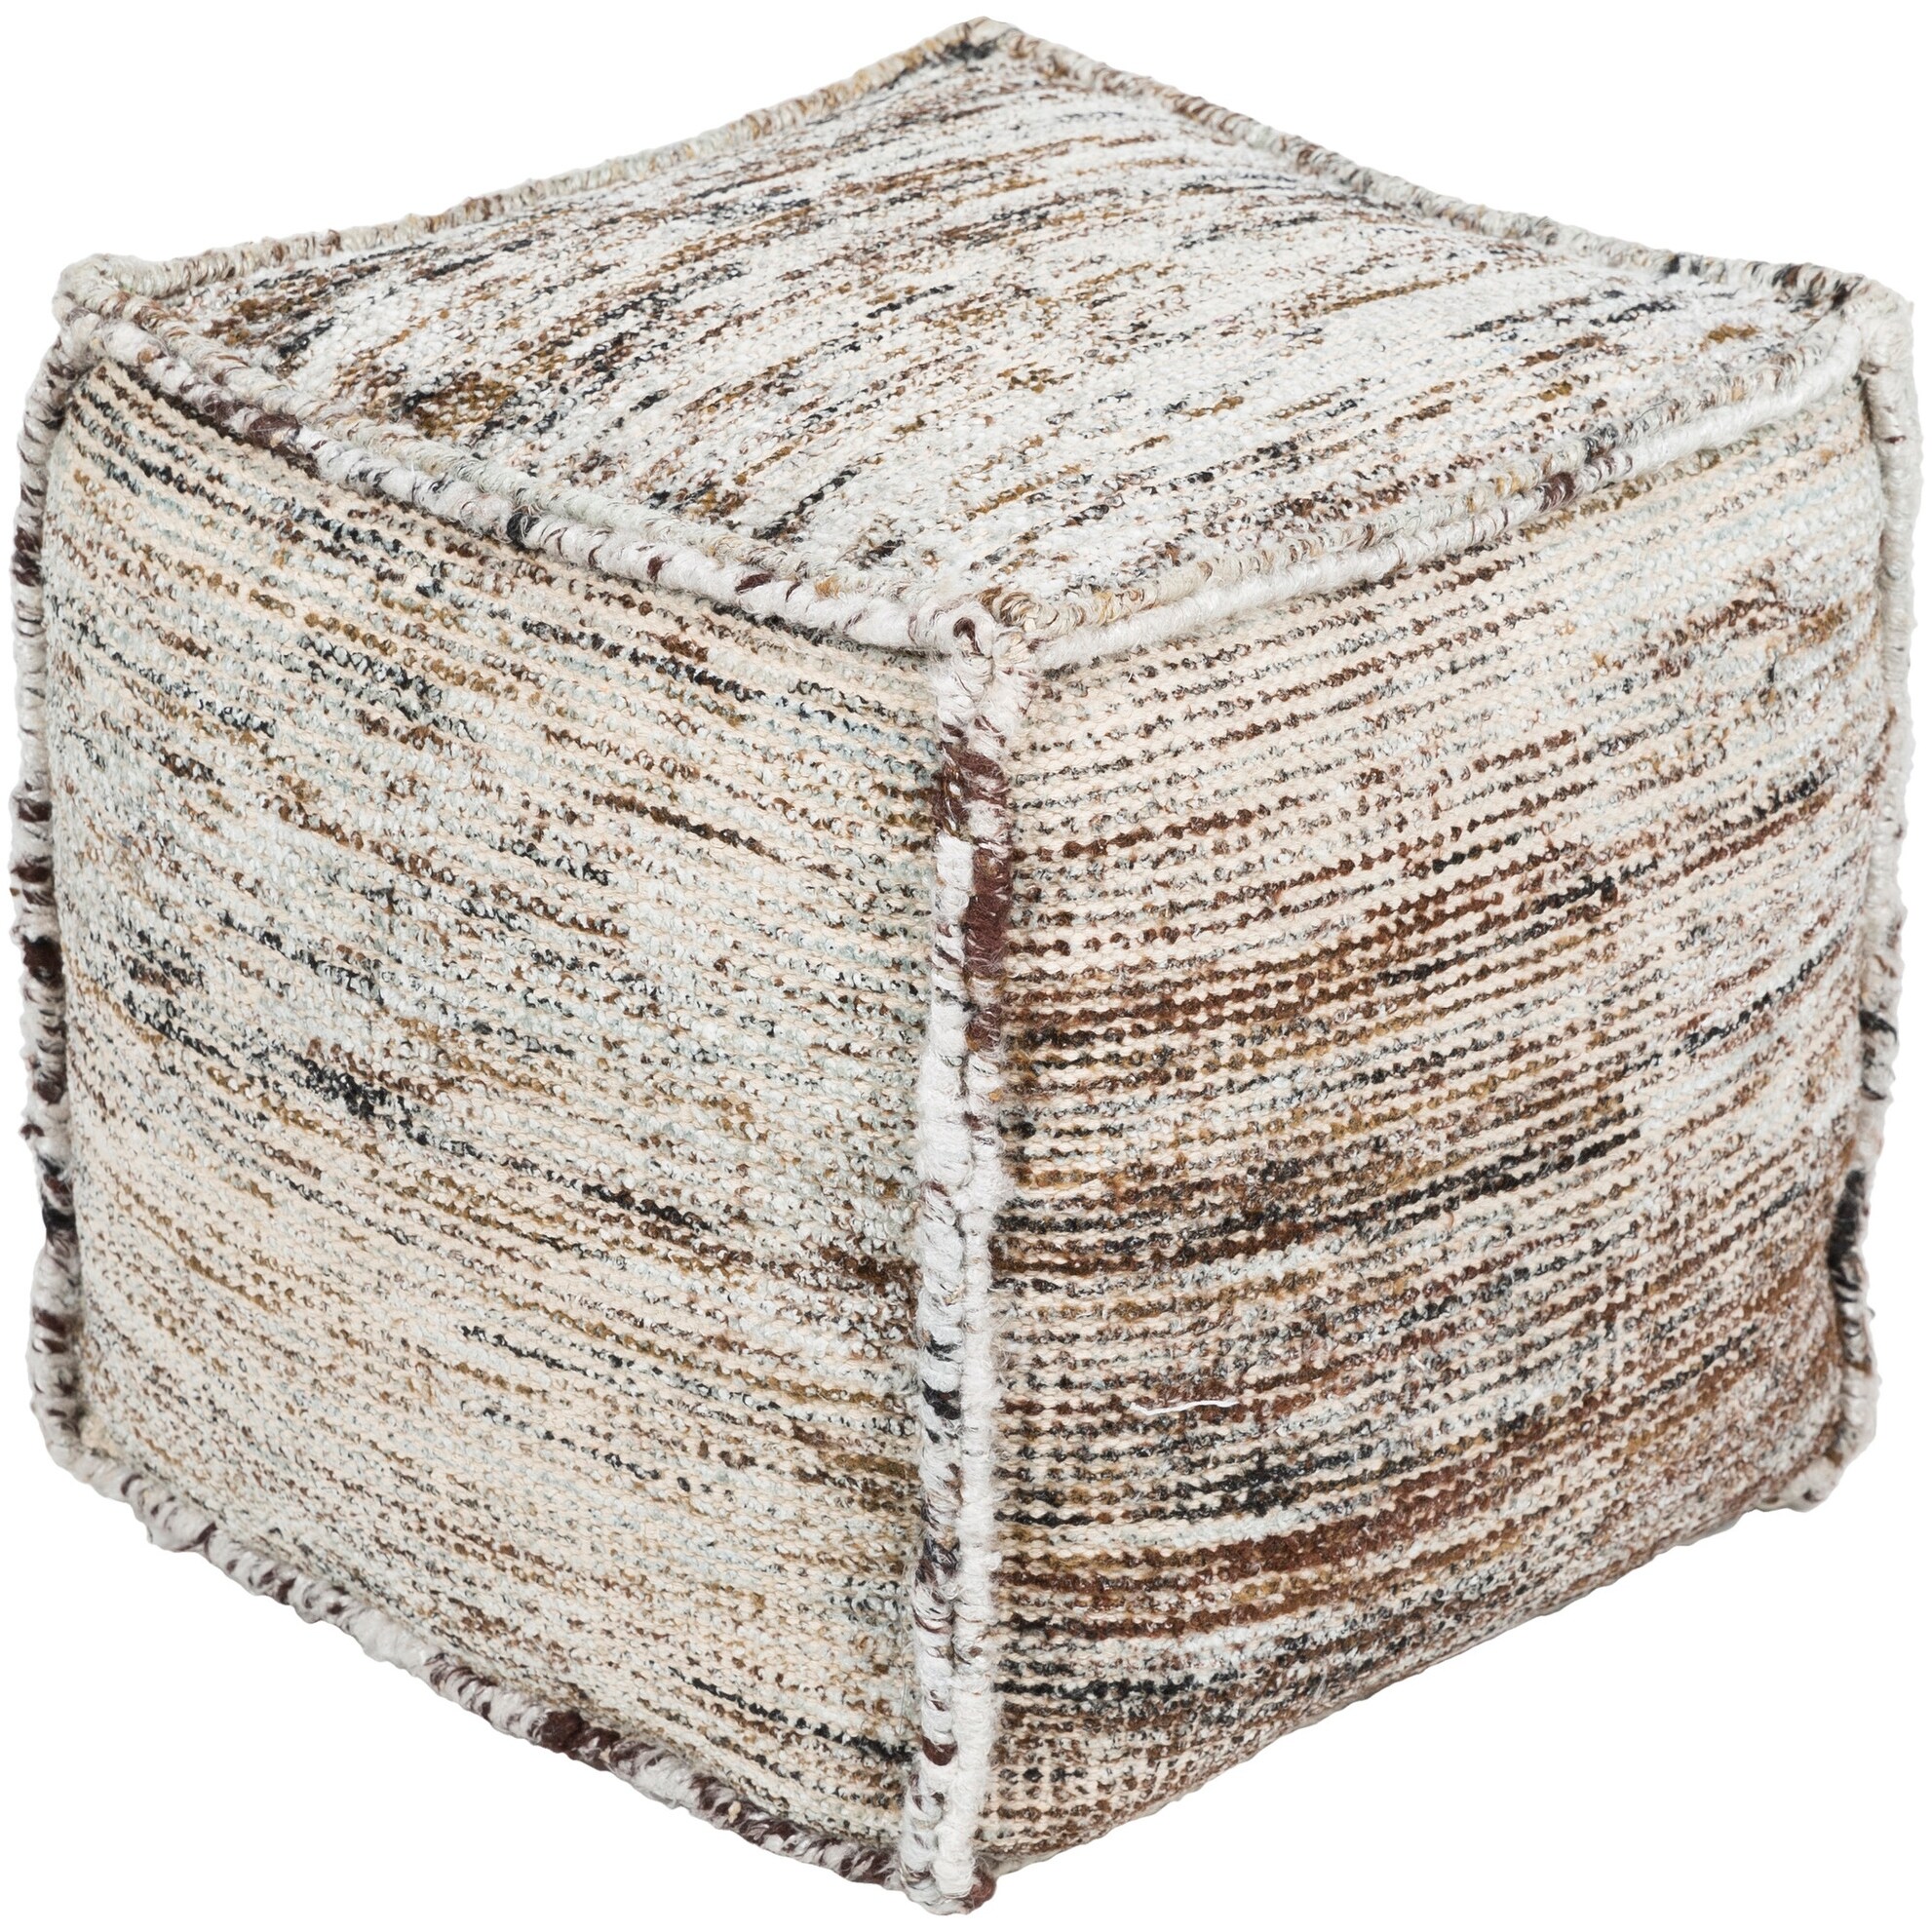 18" Brown and Gray Woven Cube Pouf Ottoman with Cover